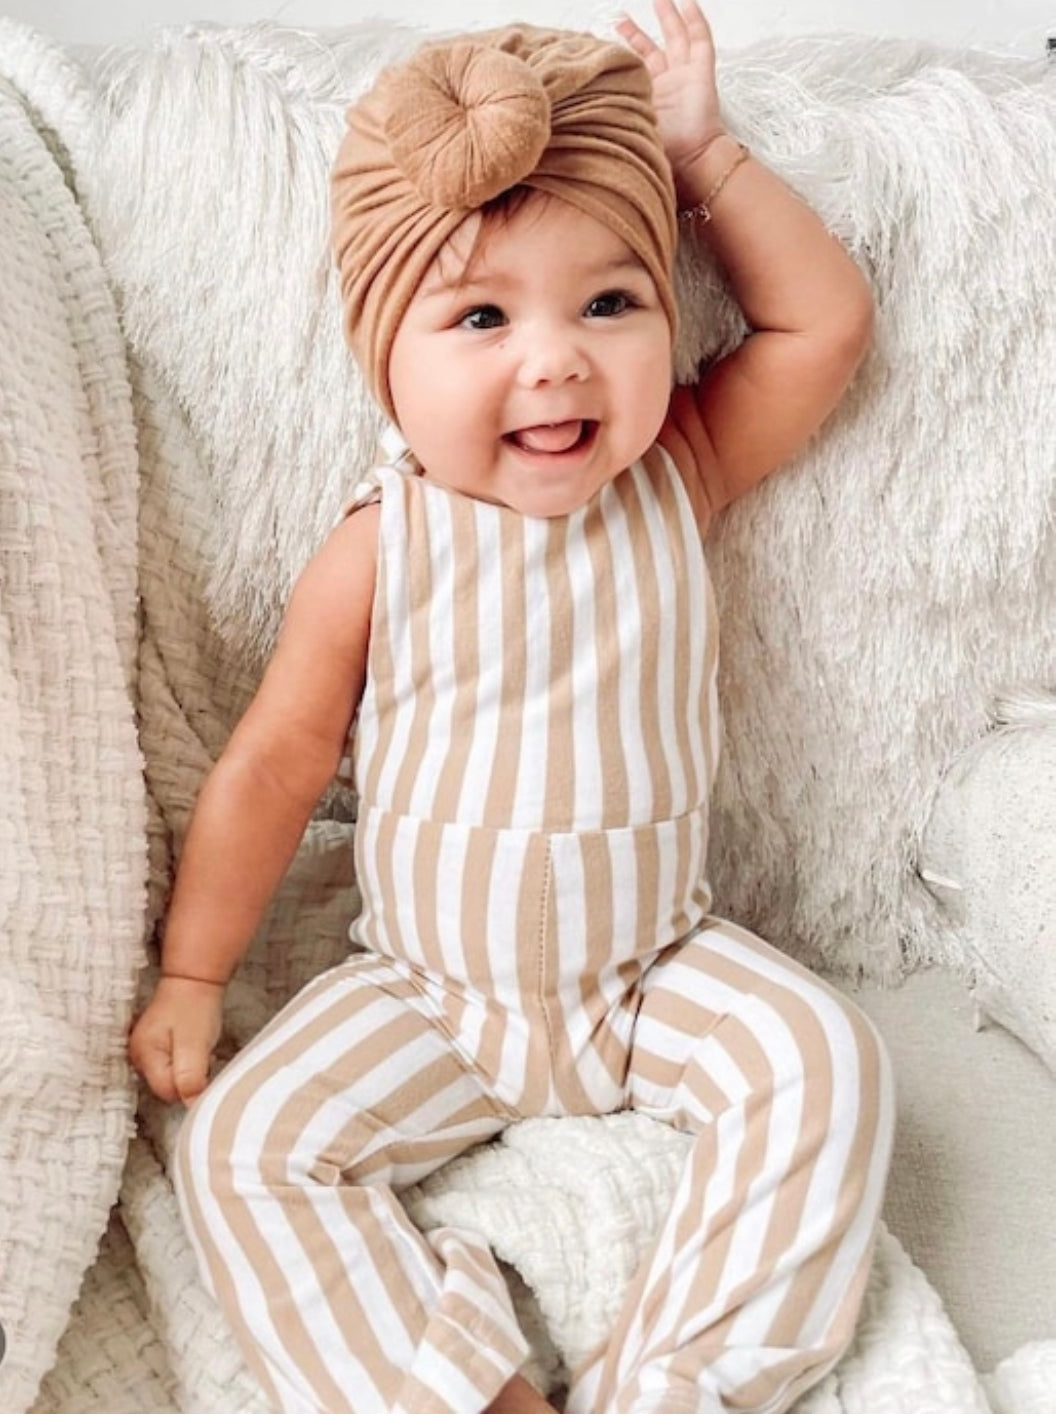 Striped Baby Flares Playsuit.